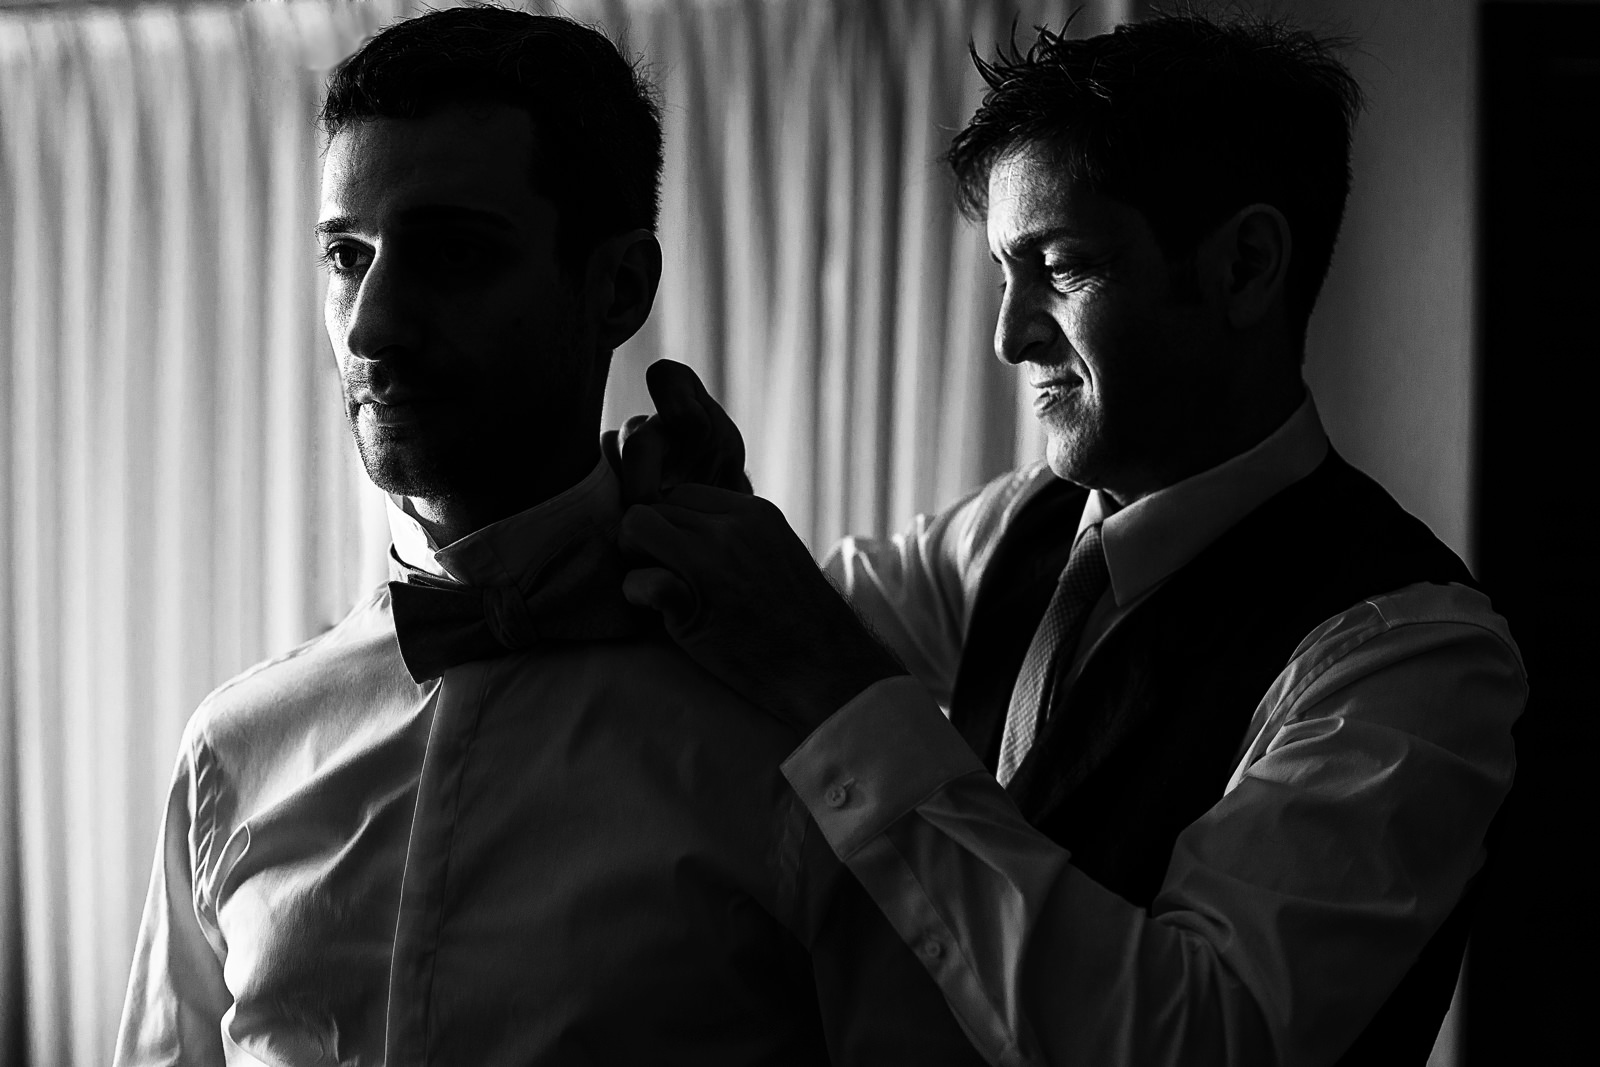 Groom helping his partner with the bow tie before the ceremony on their wedding day